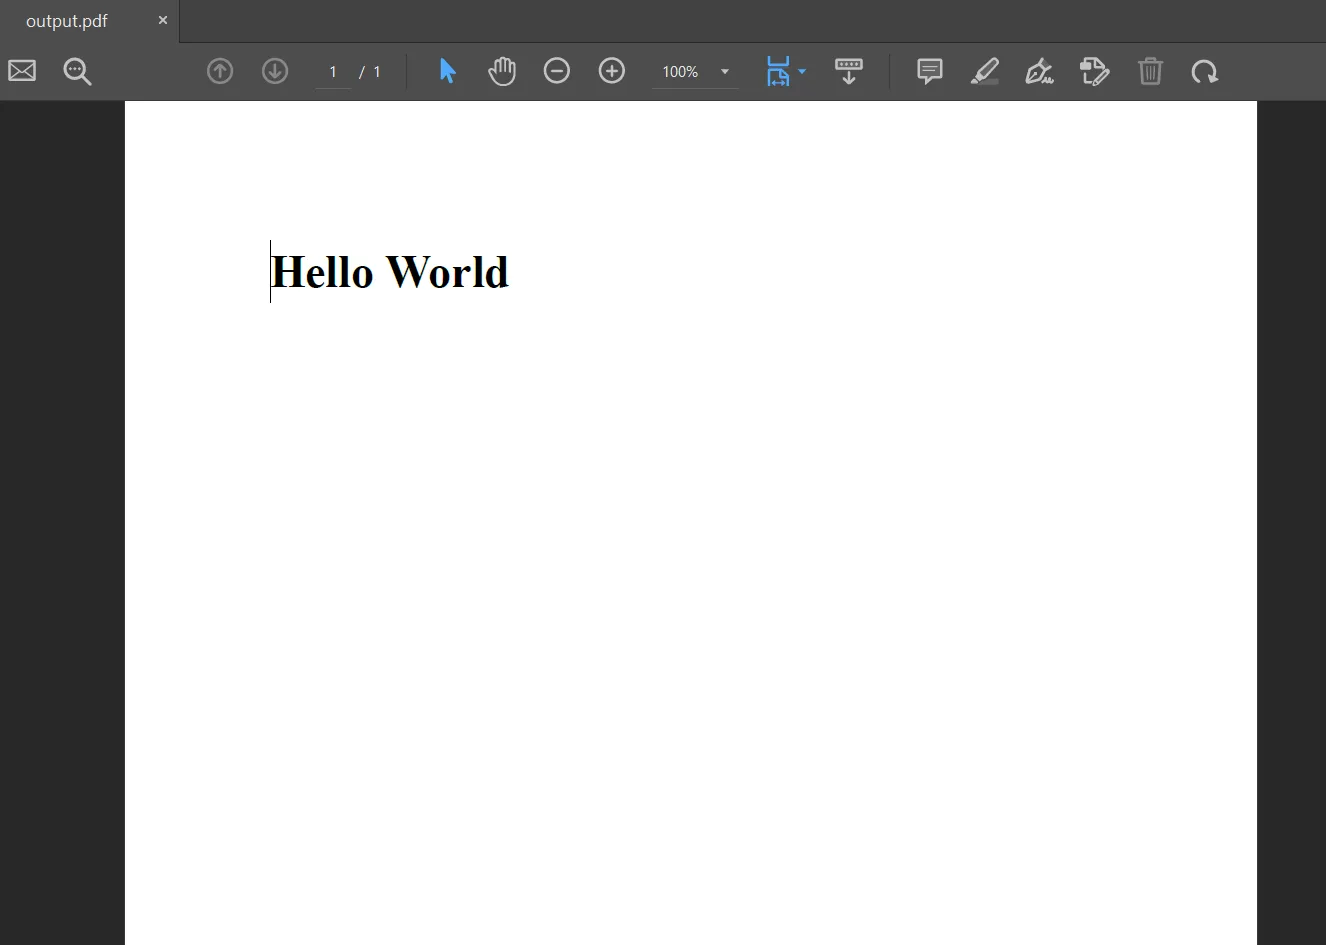 .NET Core PDF Library, Figure 6: PDF file output from Hello World HTML text